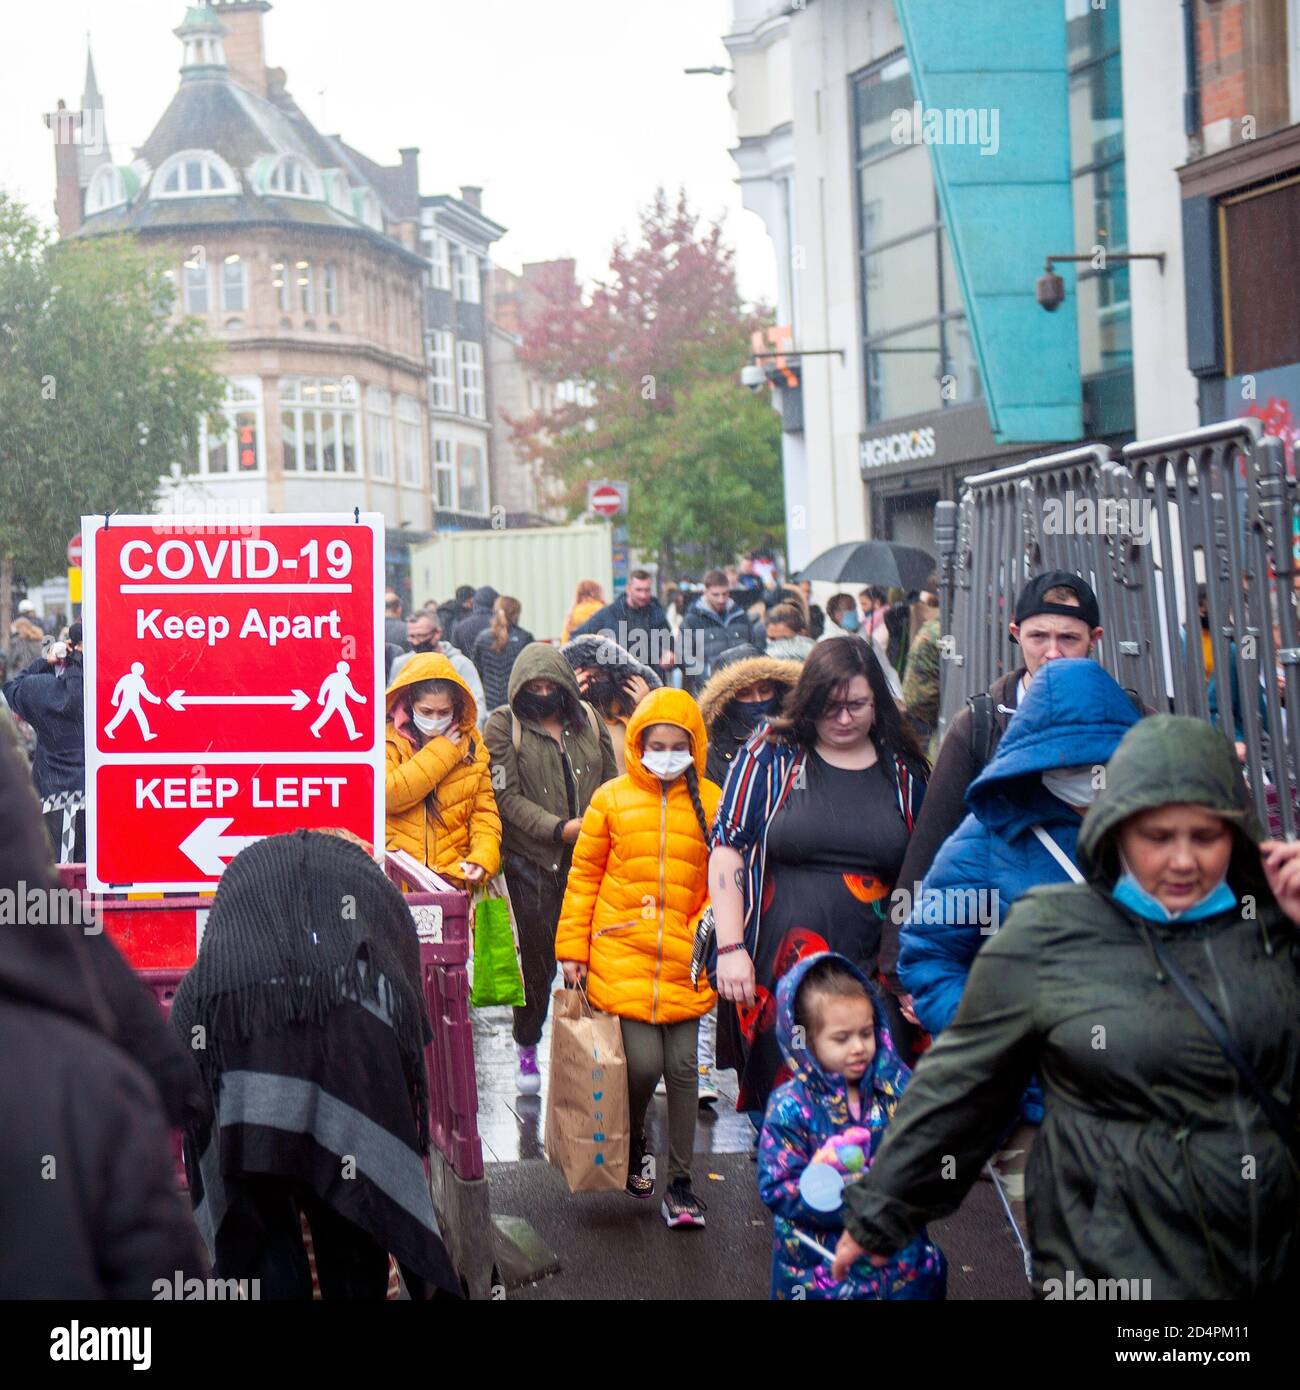 Covid-19 social distancing sign observed by shoppers in the rain. Stock Photo